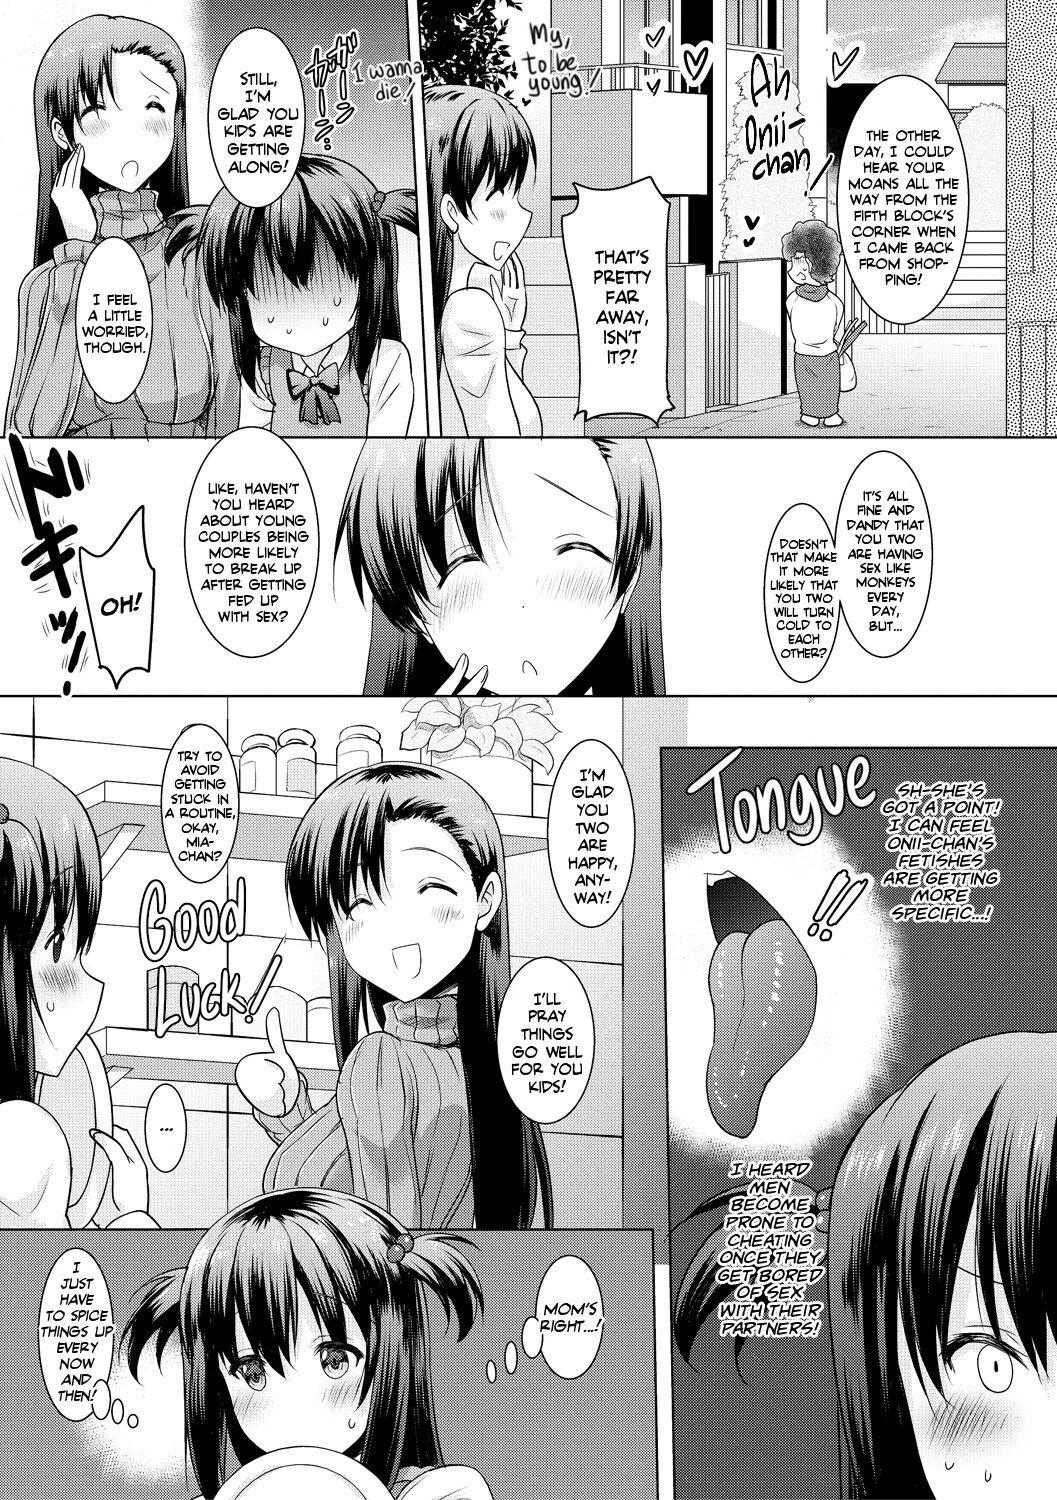 [Pony-R] I Can't Live Without My Little Sister's Tongue Chapter 01-02 + Secret Baby-making Sex with a Big-titted Mother and Daughter! (Kyonyuu Oyako no Shita to Shikyuu ni Renzoku Shasei) [English] [Team Rabu2] [Digital] 45